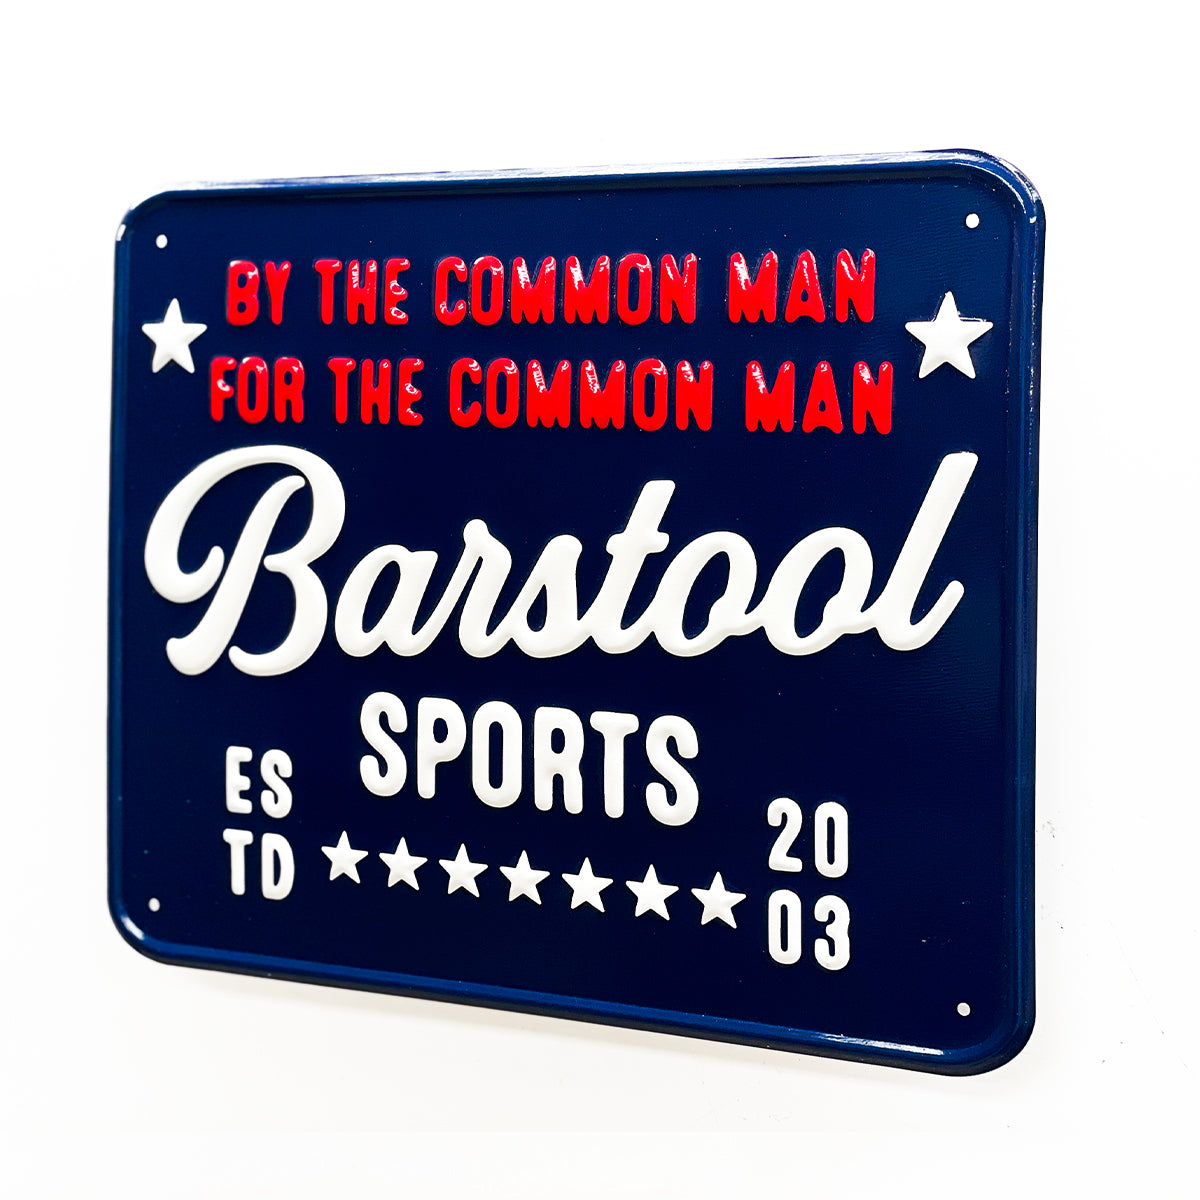 Common Man Bar Sign-Accessories-Barstool Sports-Navy-One Size-Barstool Sports